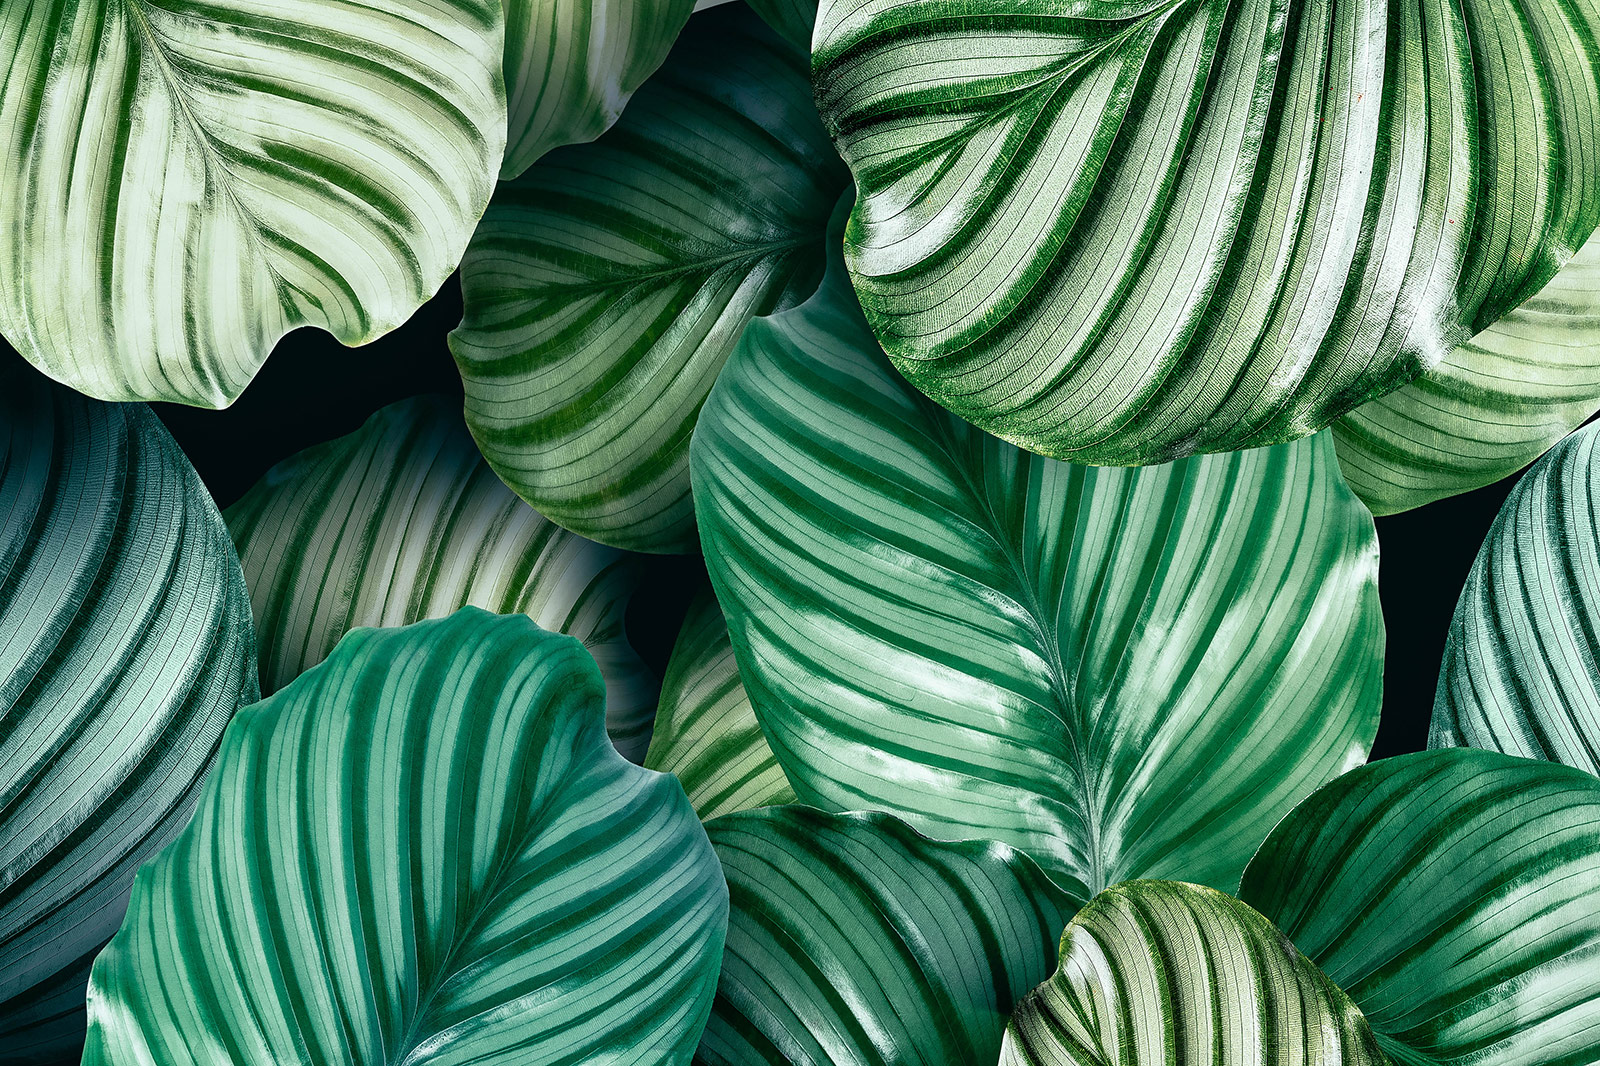 Overhead view of a cluster of Calathea orbifolia plant leaves in varying shades of green and cream stripes